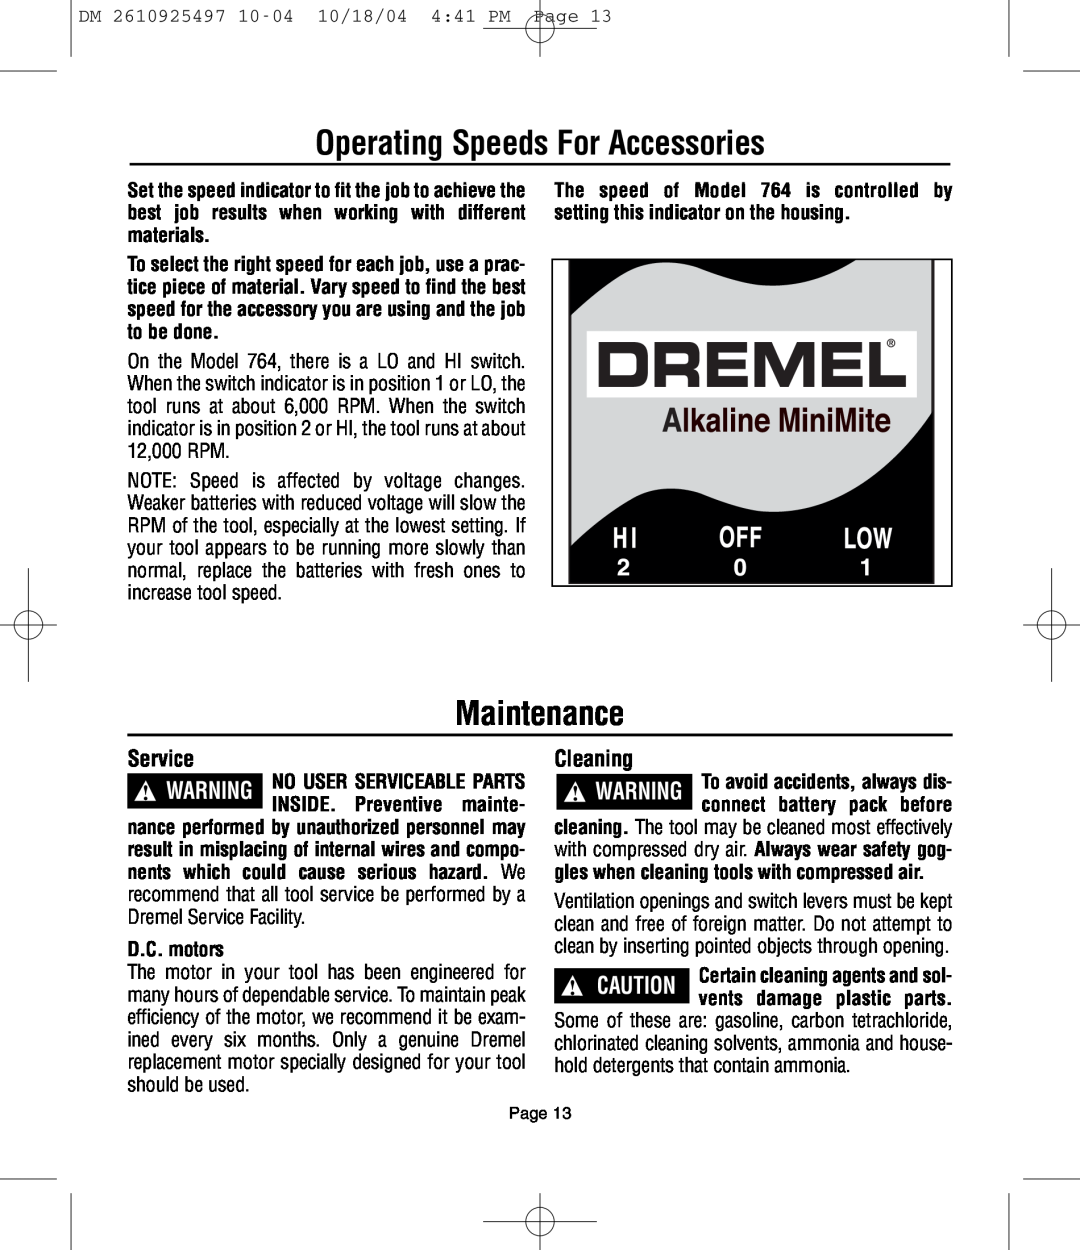 Dremel 764 owner manual Operating Speeds For Accessories, Maintenance, Cleaning, Service 